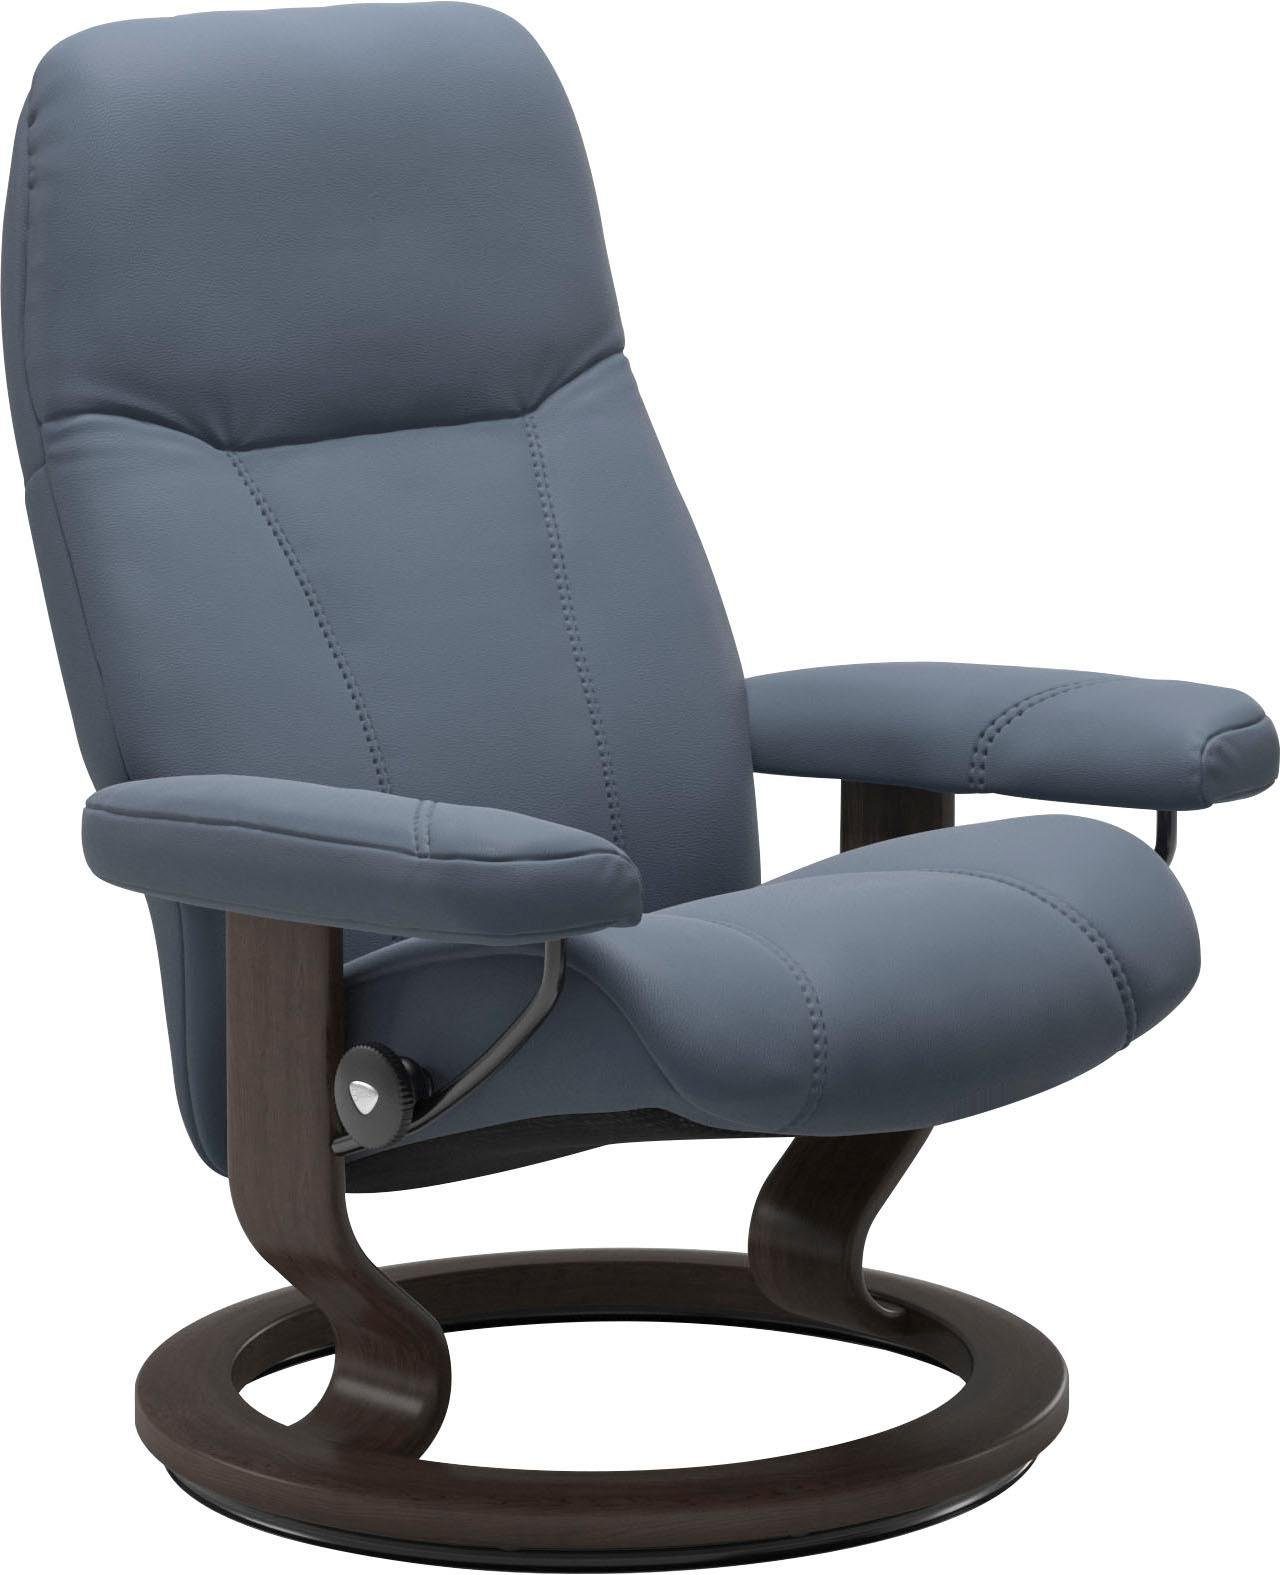 Stressless® Relaxsessel Classic L, Gestell Größe Base, Consul, mit Wenge